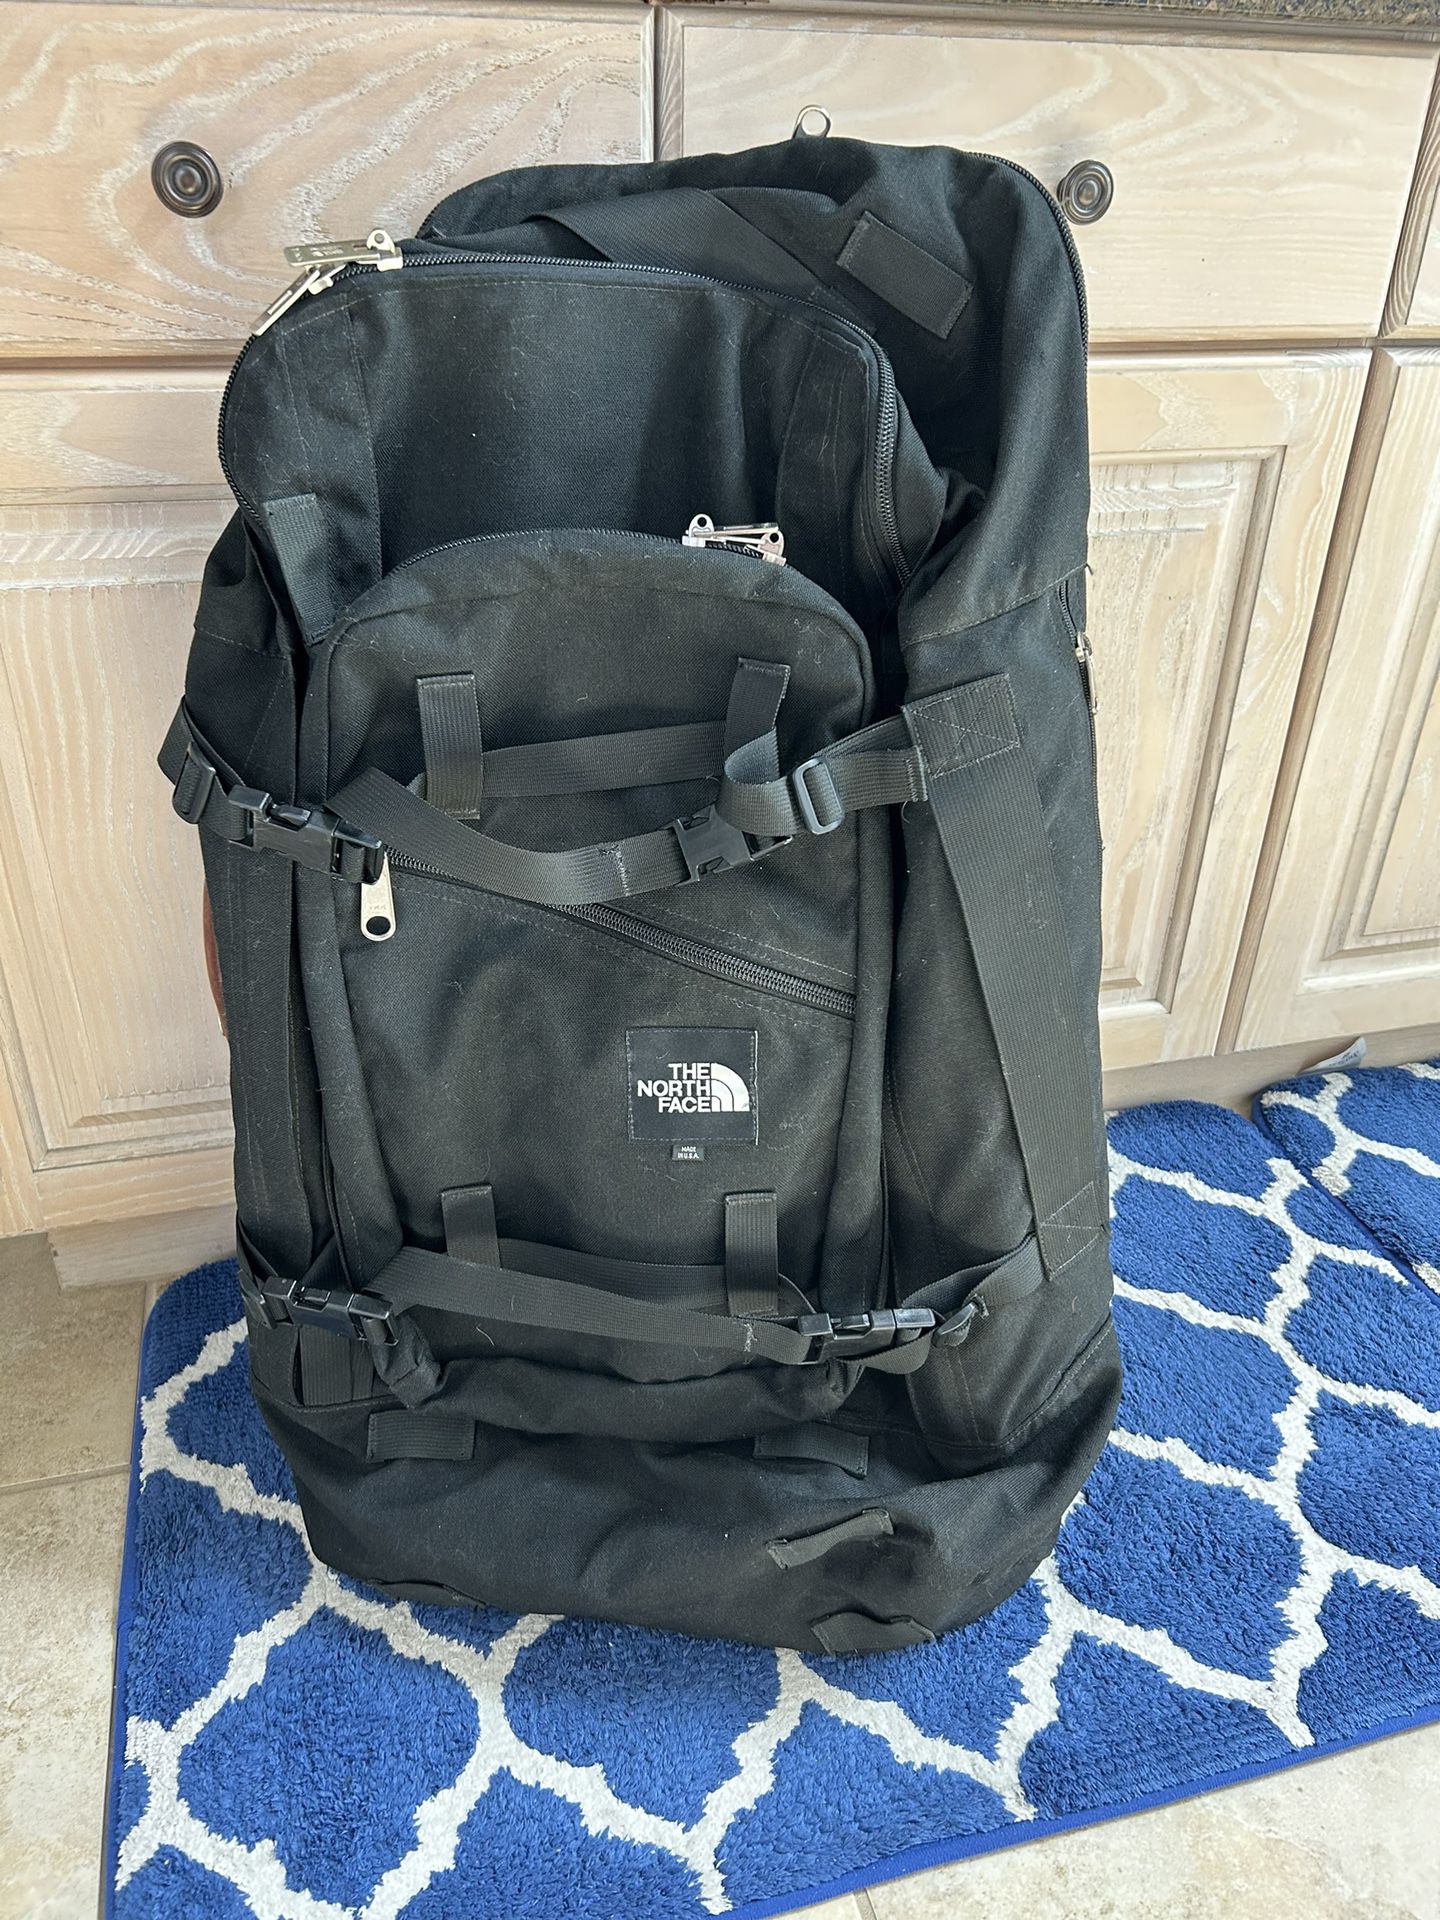 The North Face Backpack/luggage